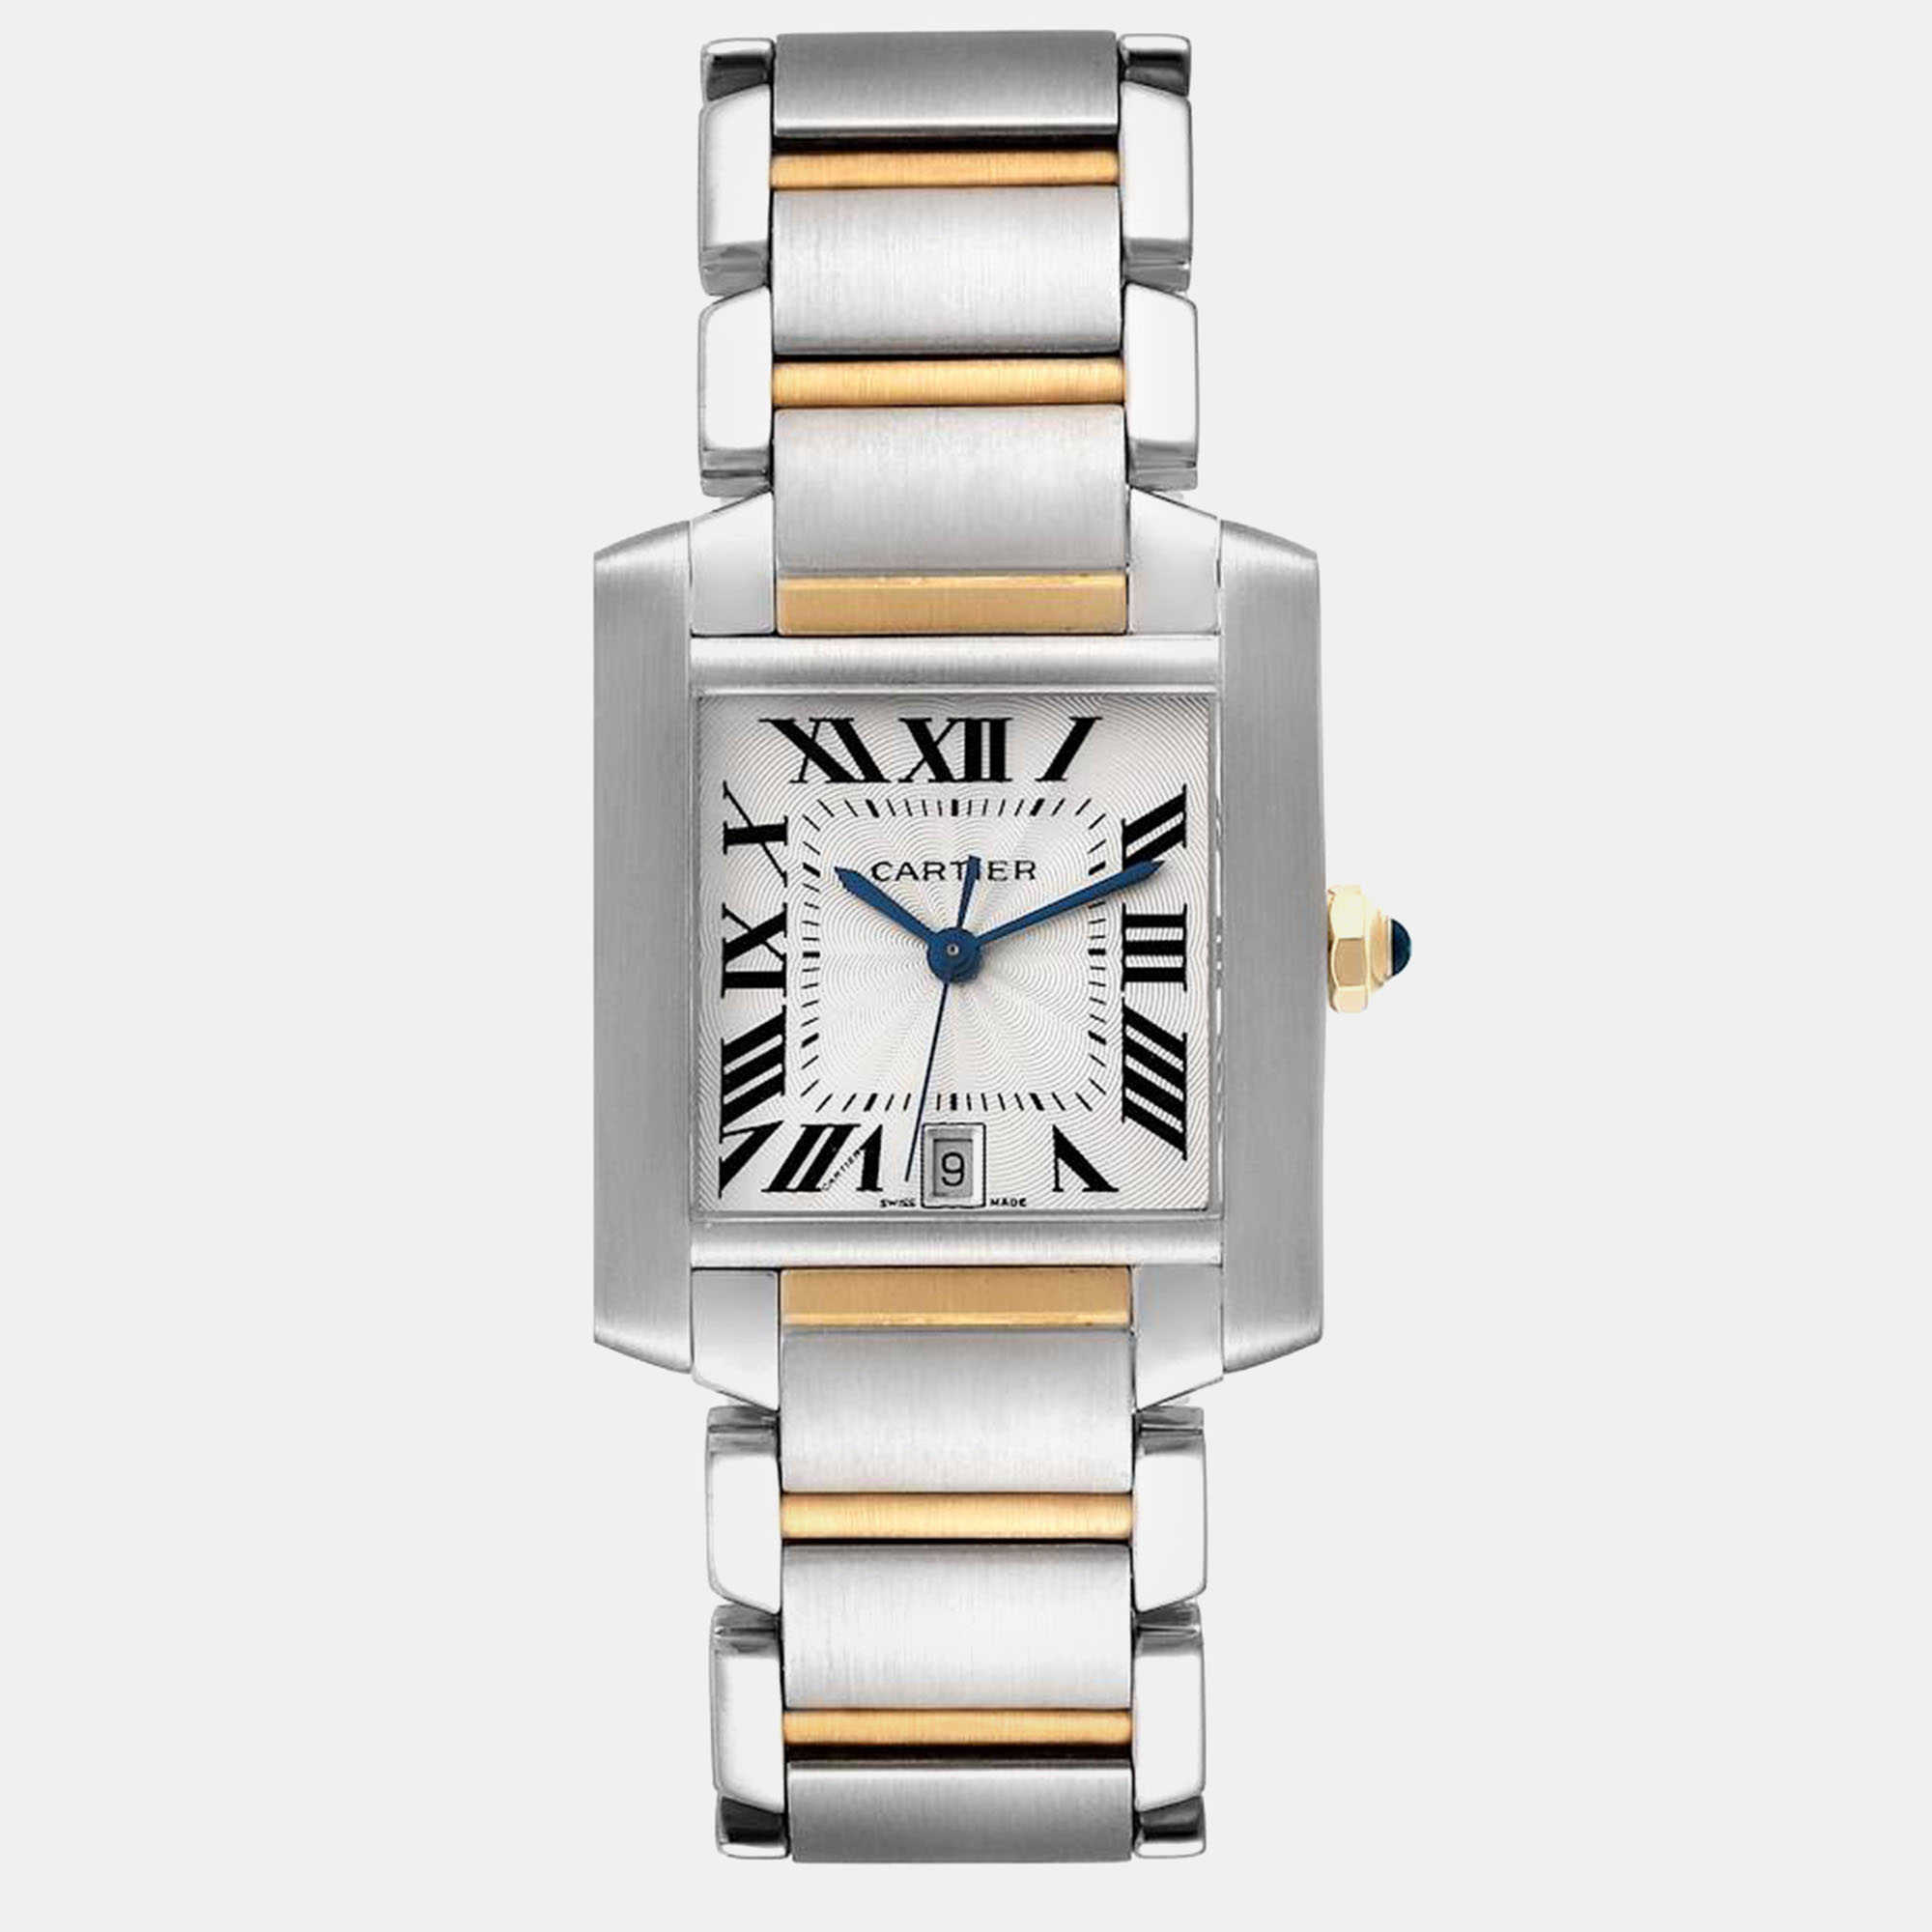 Pre-owned Cartier Tank Francaise Steel Yellow Gold Silver Dial Mens Watch W51005q4 28.0 Mm X 32.0 Mm In White